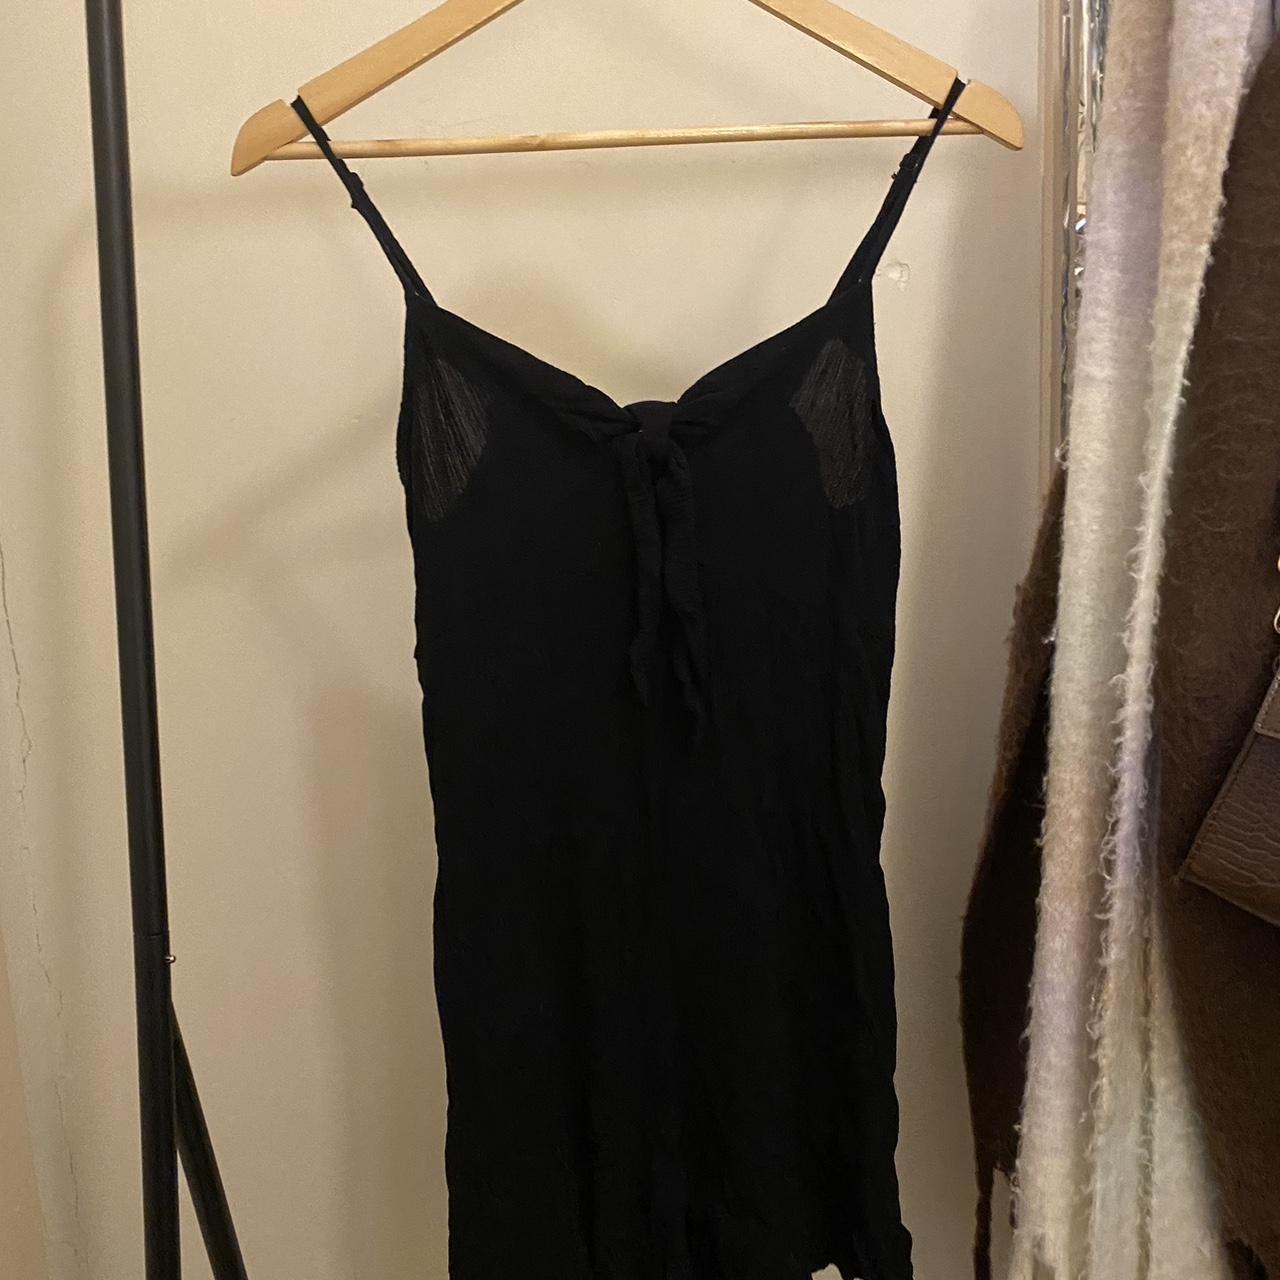 mini dress that ties at the front - Depop